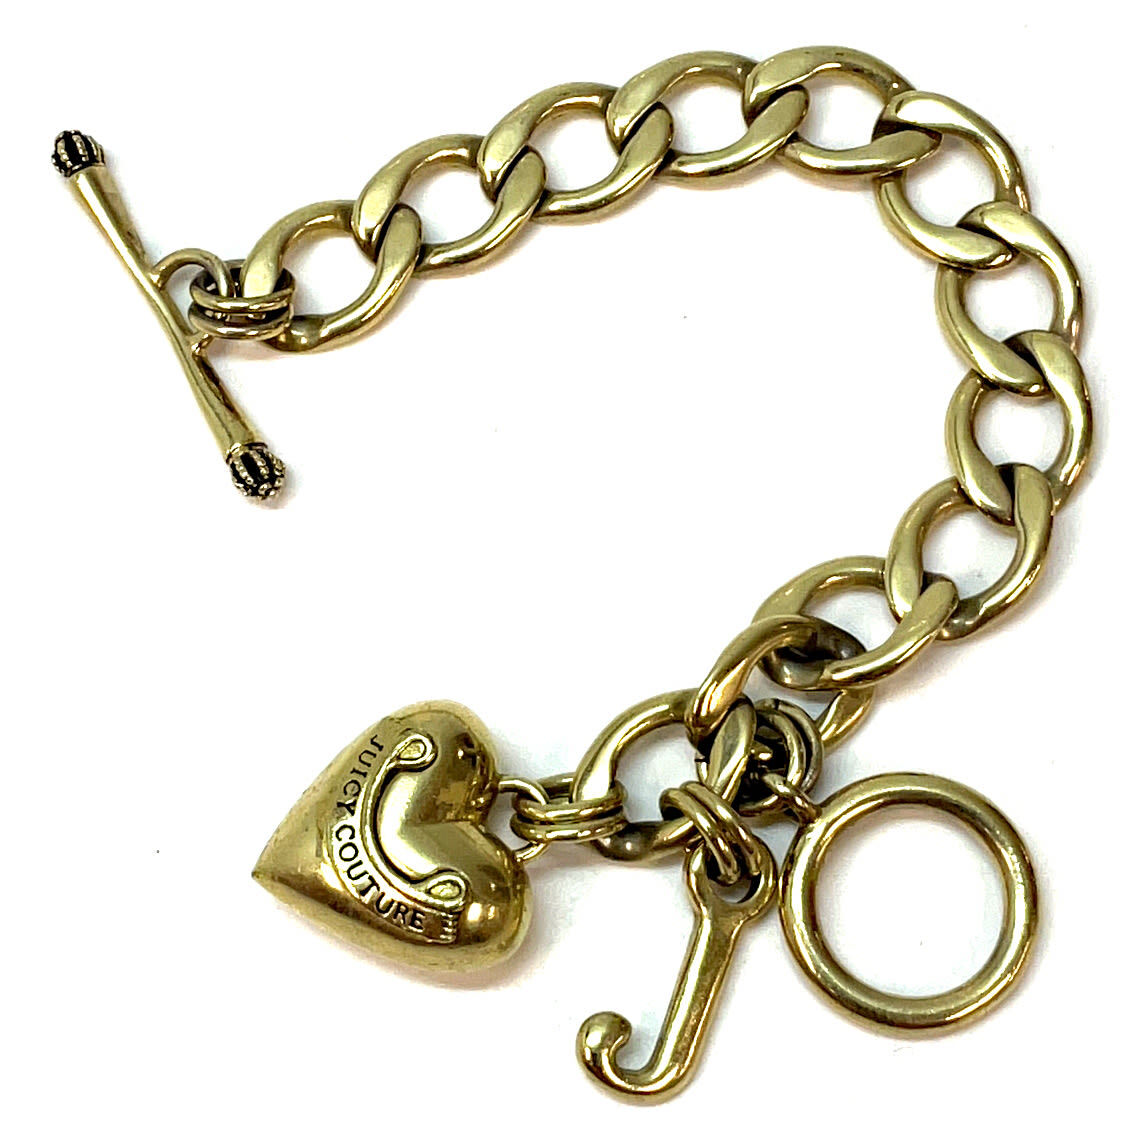 14K Yellow Gold Cuban Link Bracelet With Heart Charm And Toggle Clasp  65650: buy online in NYC. Best price at TRAXNYC.